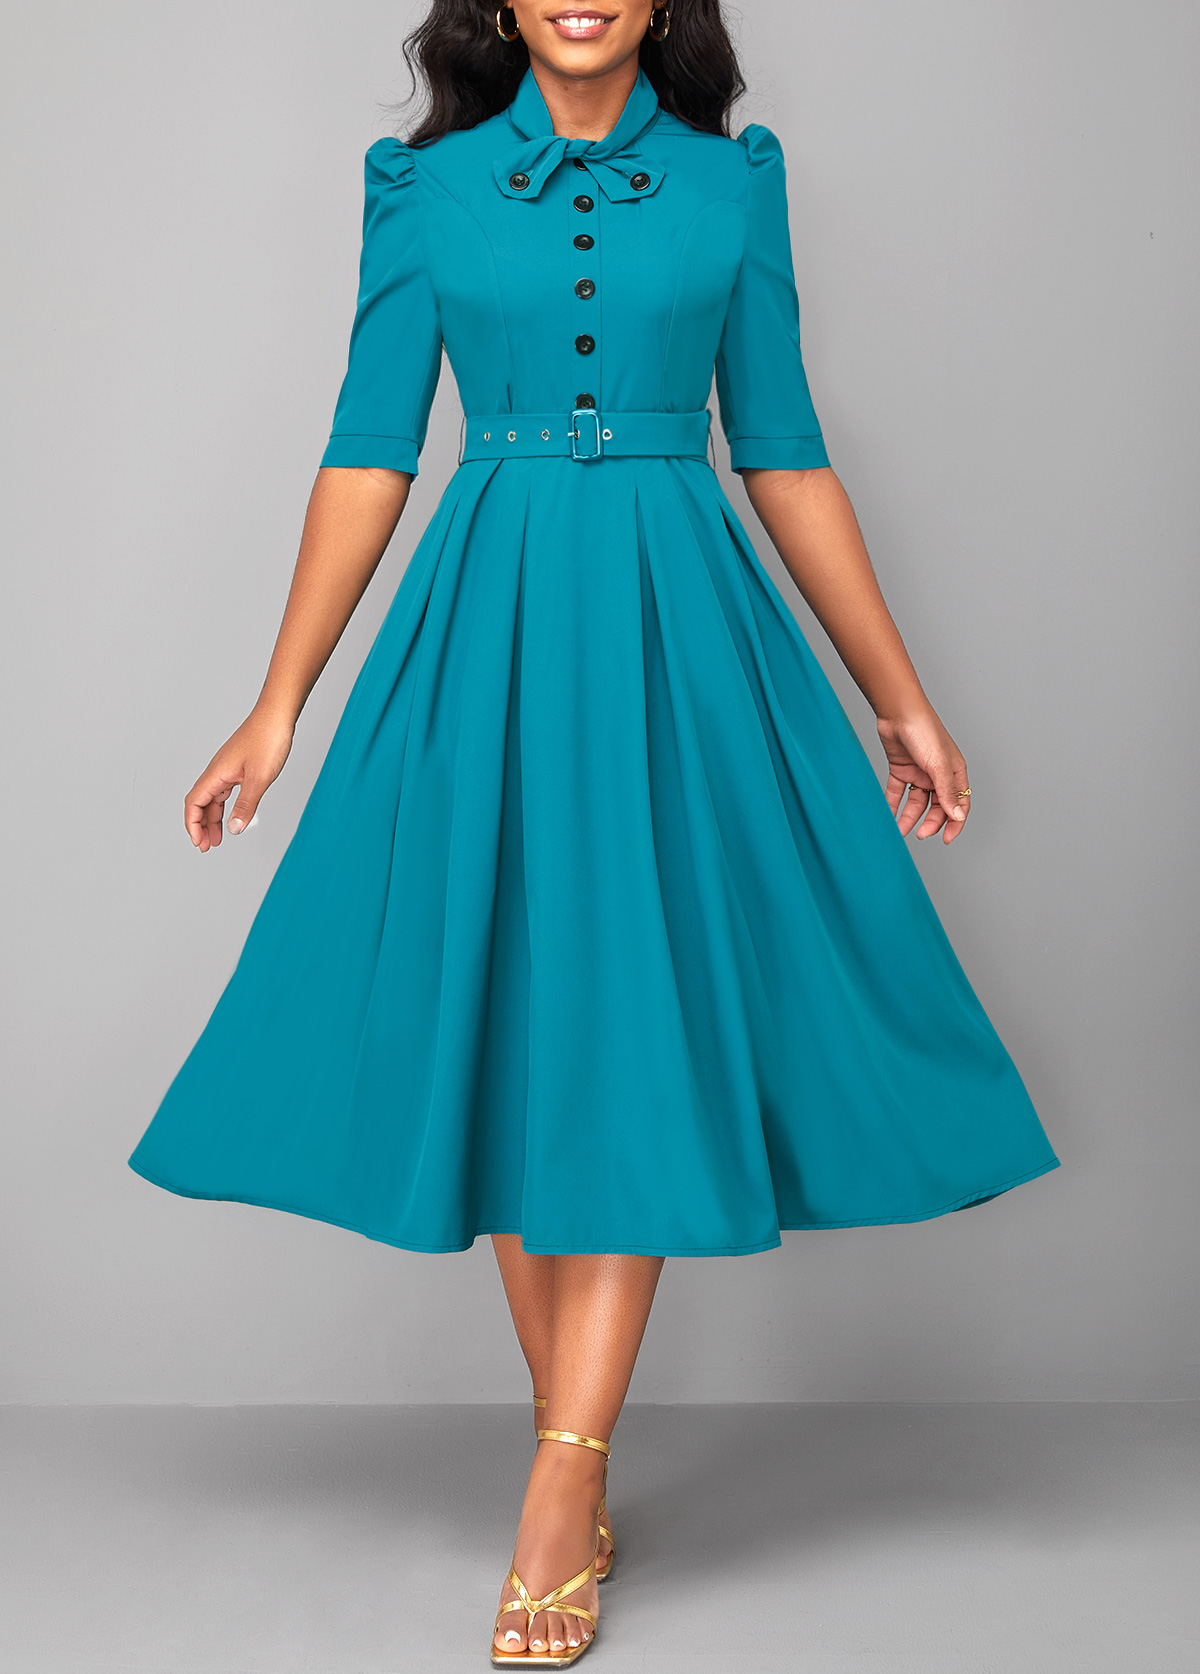 Half Sleeve Turquoise Tie Belted Dress